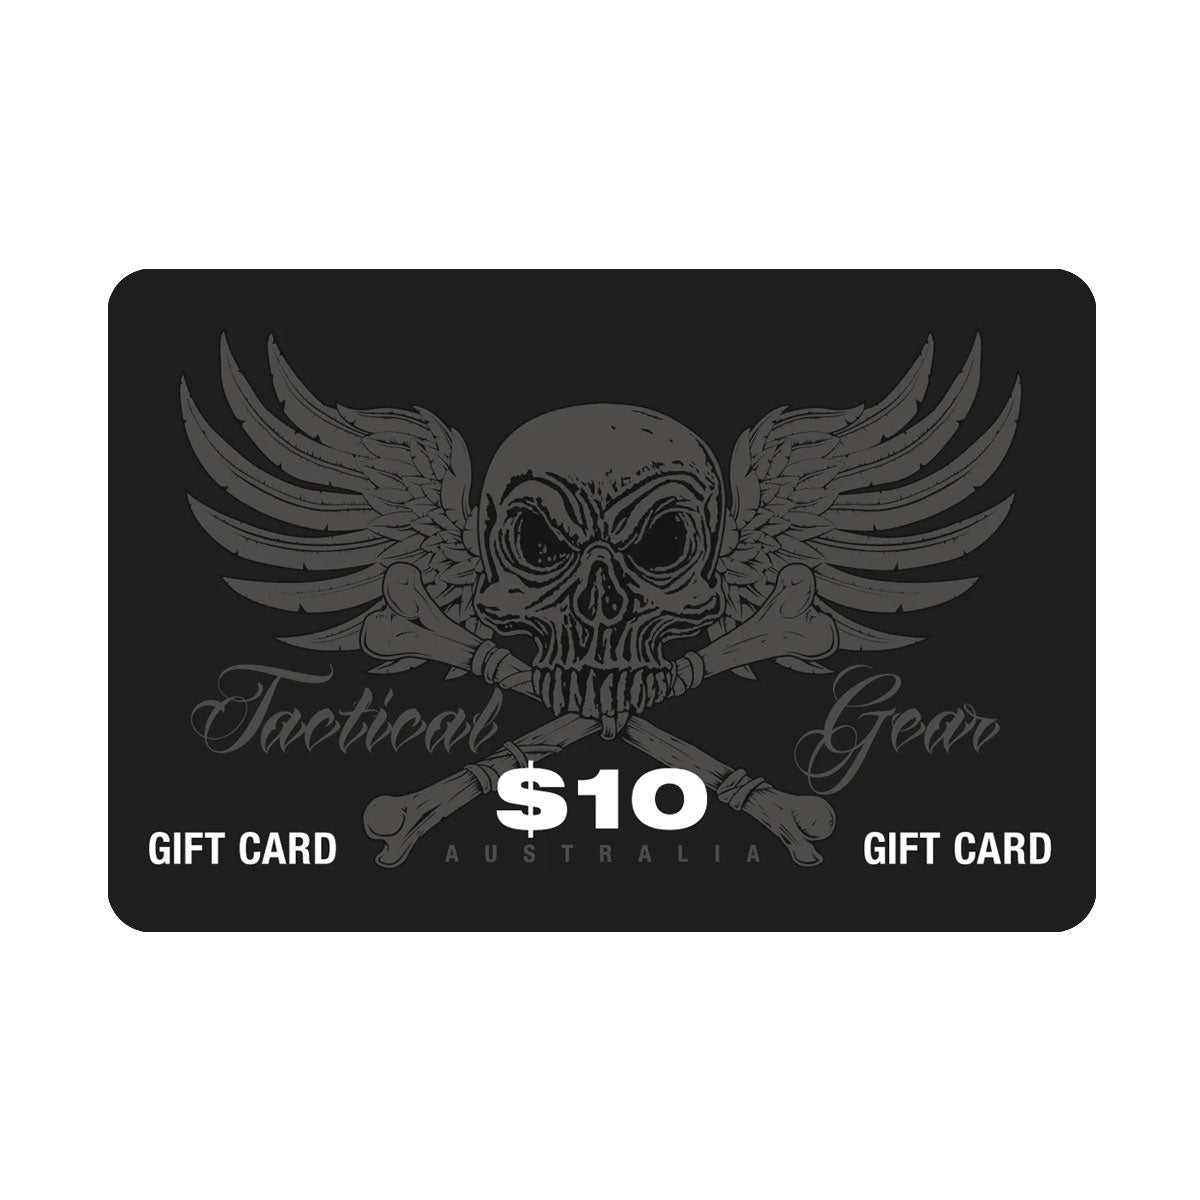 Tactical Gear Gift Card Ideal Gift For Police Military Tactical Gear